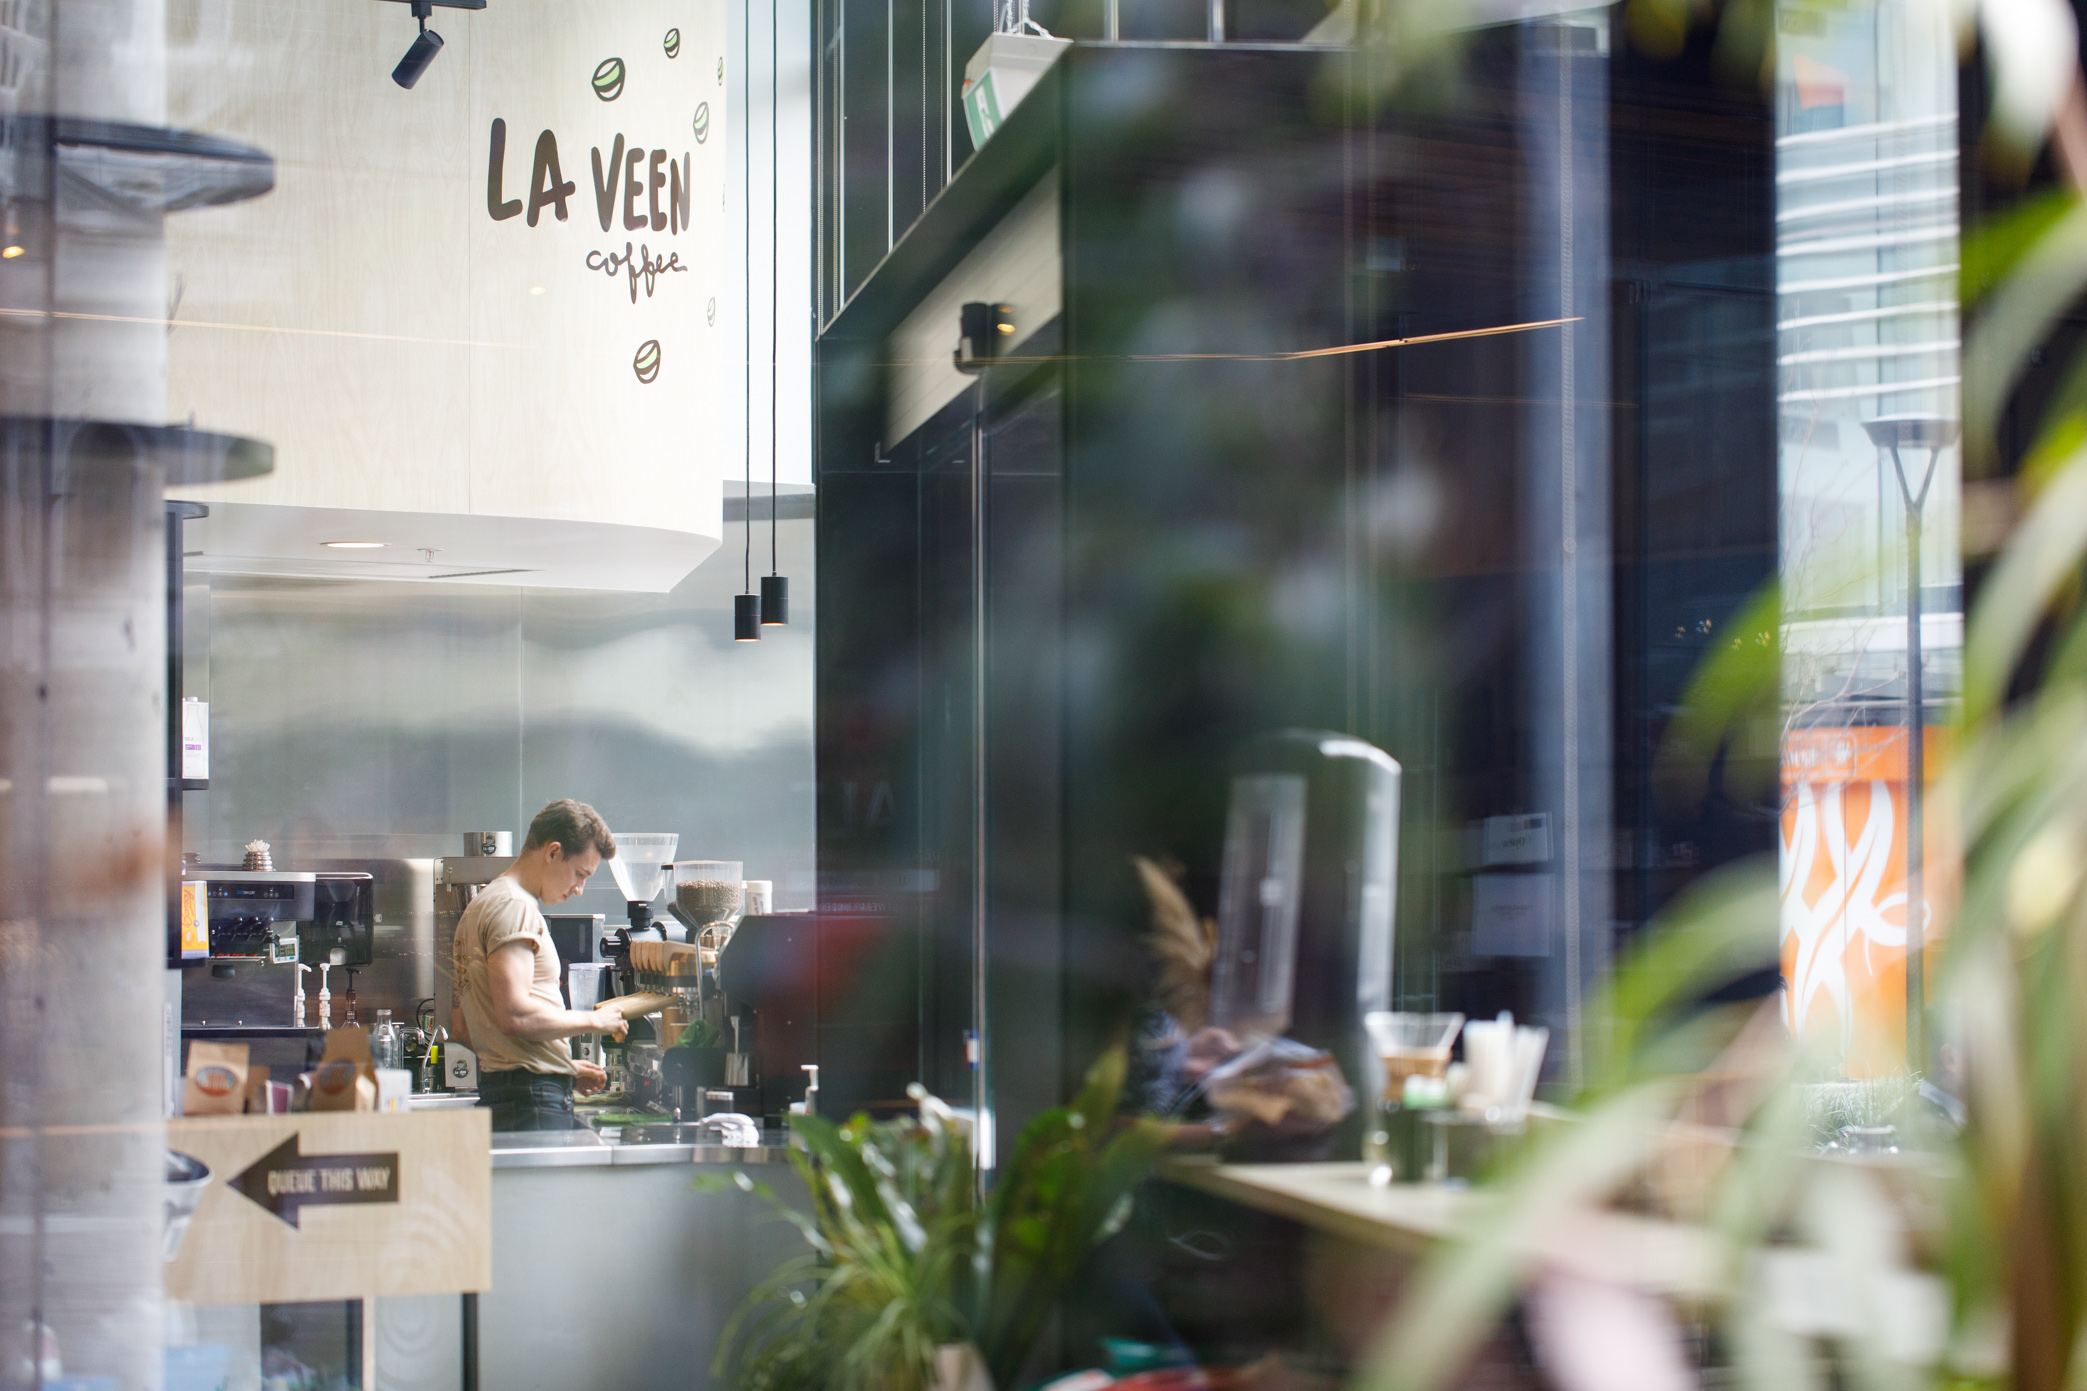 La Veen Cafe and Coffee Shop